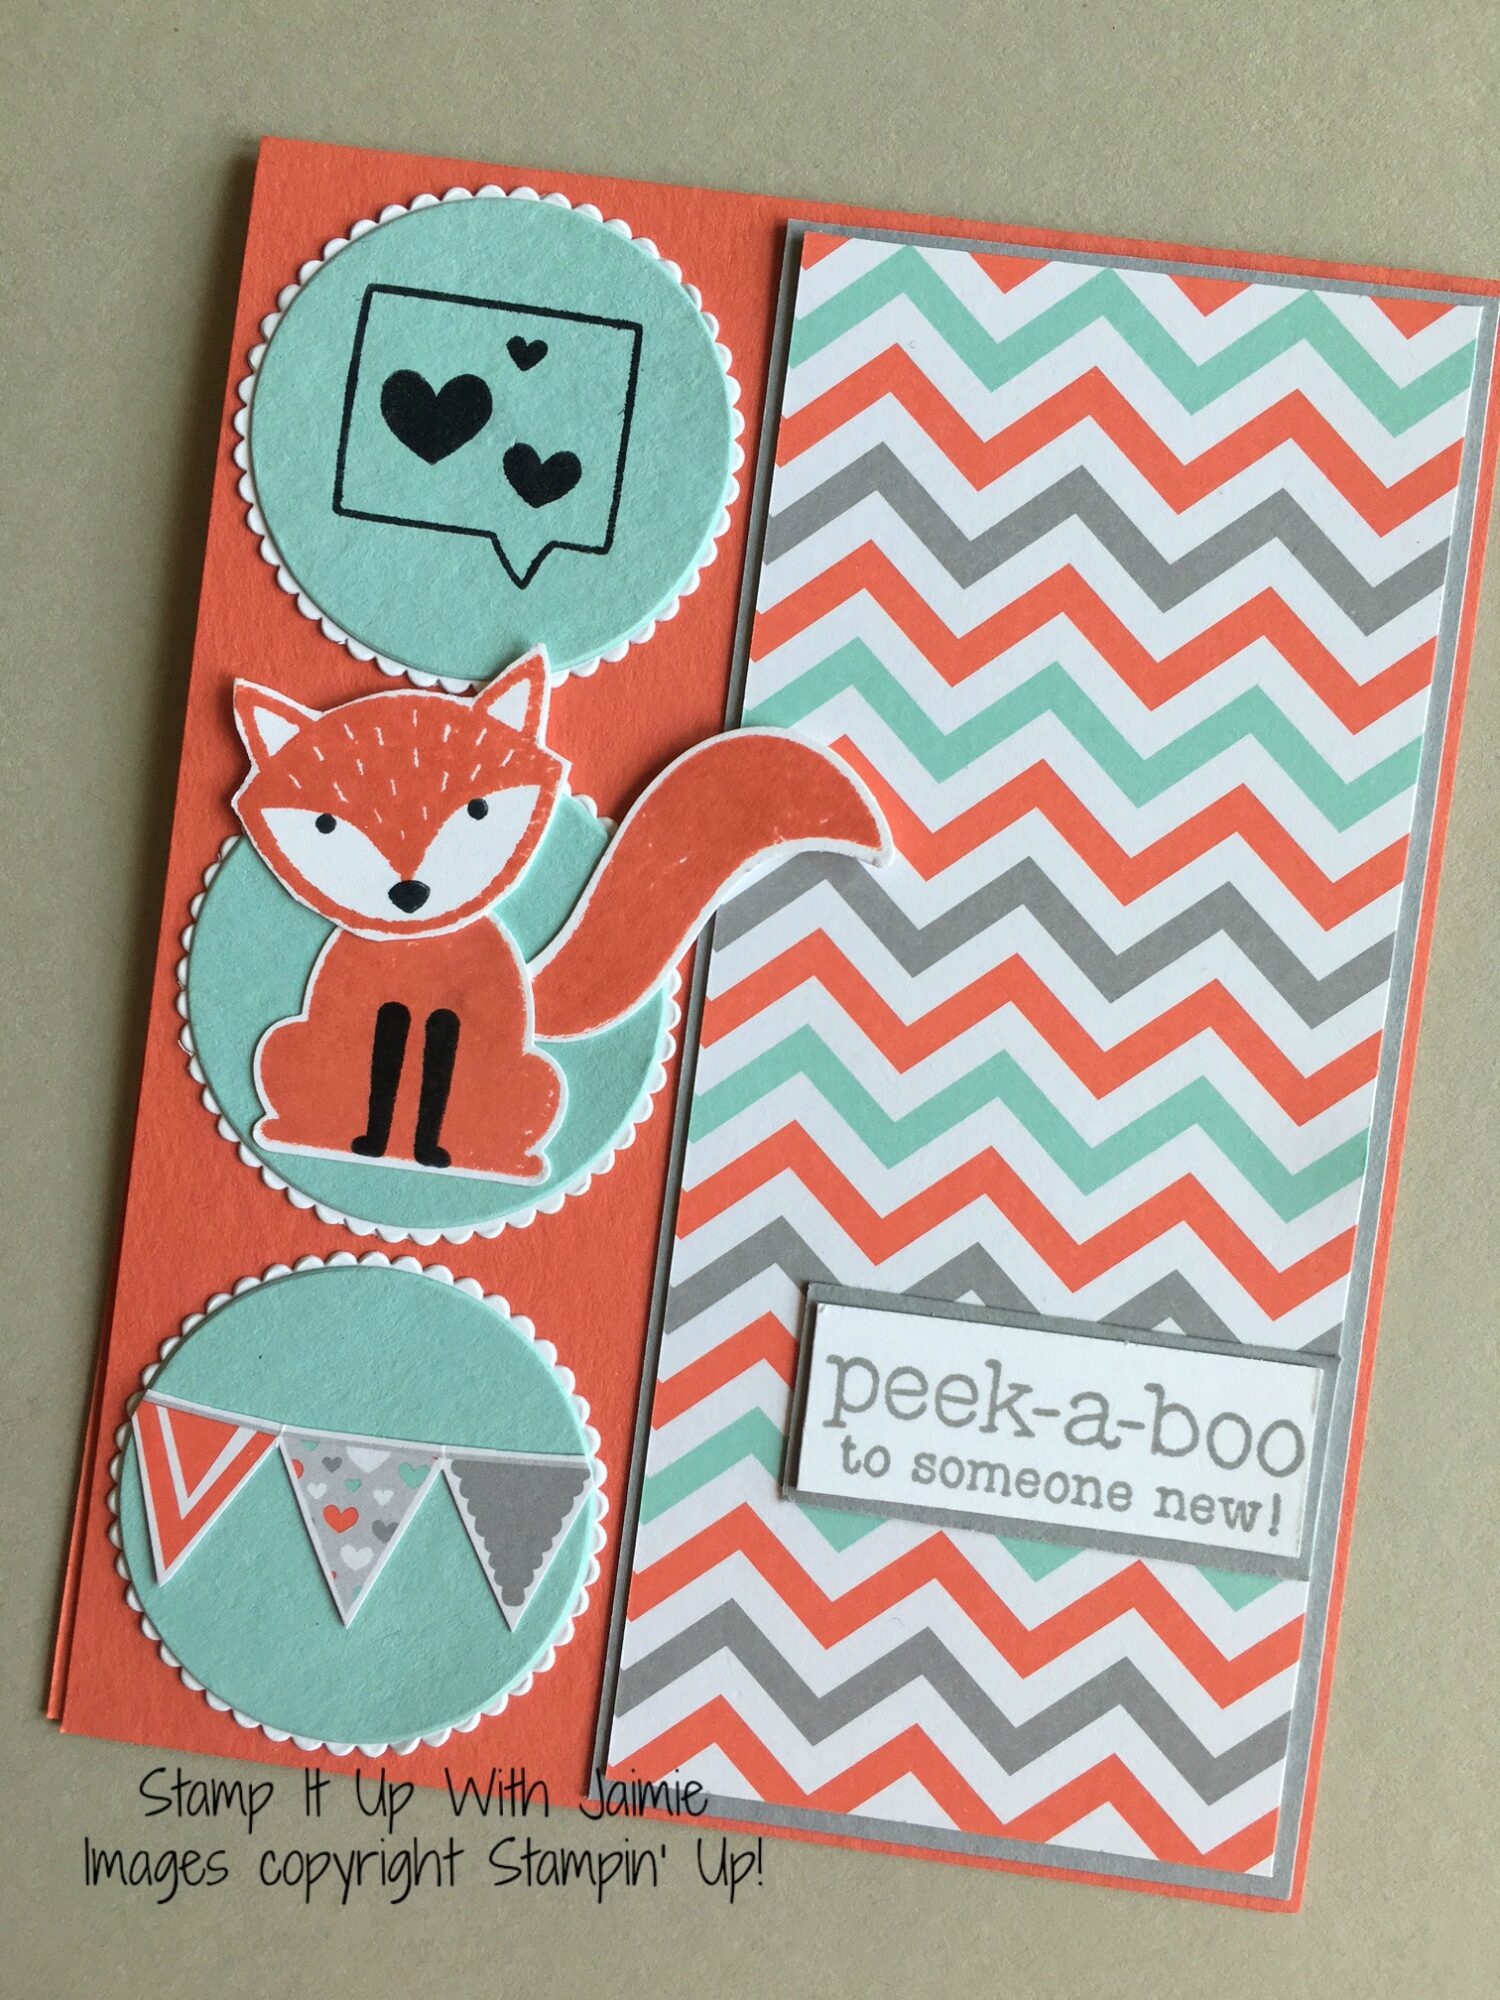 foxy-friends-stamp-it-up-with-jaimie-stampin-up